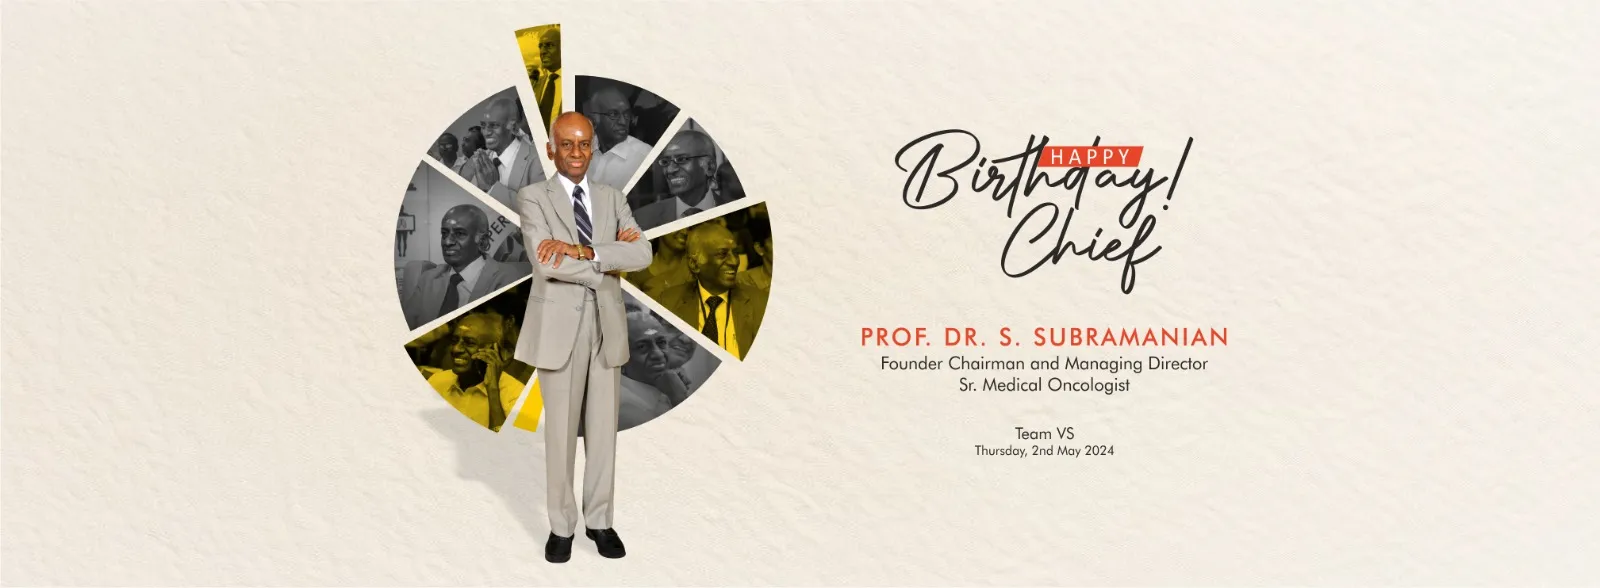 Birthday wish! Chief PROF. DR. S. SUBRAMANIAN Founder Chairman and Managing Director Sr. Medical Oncologist